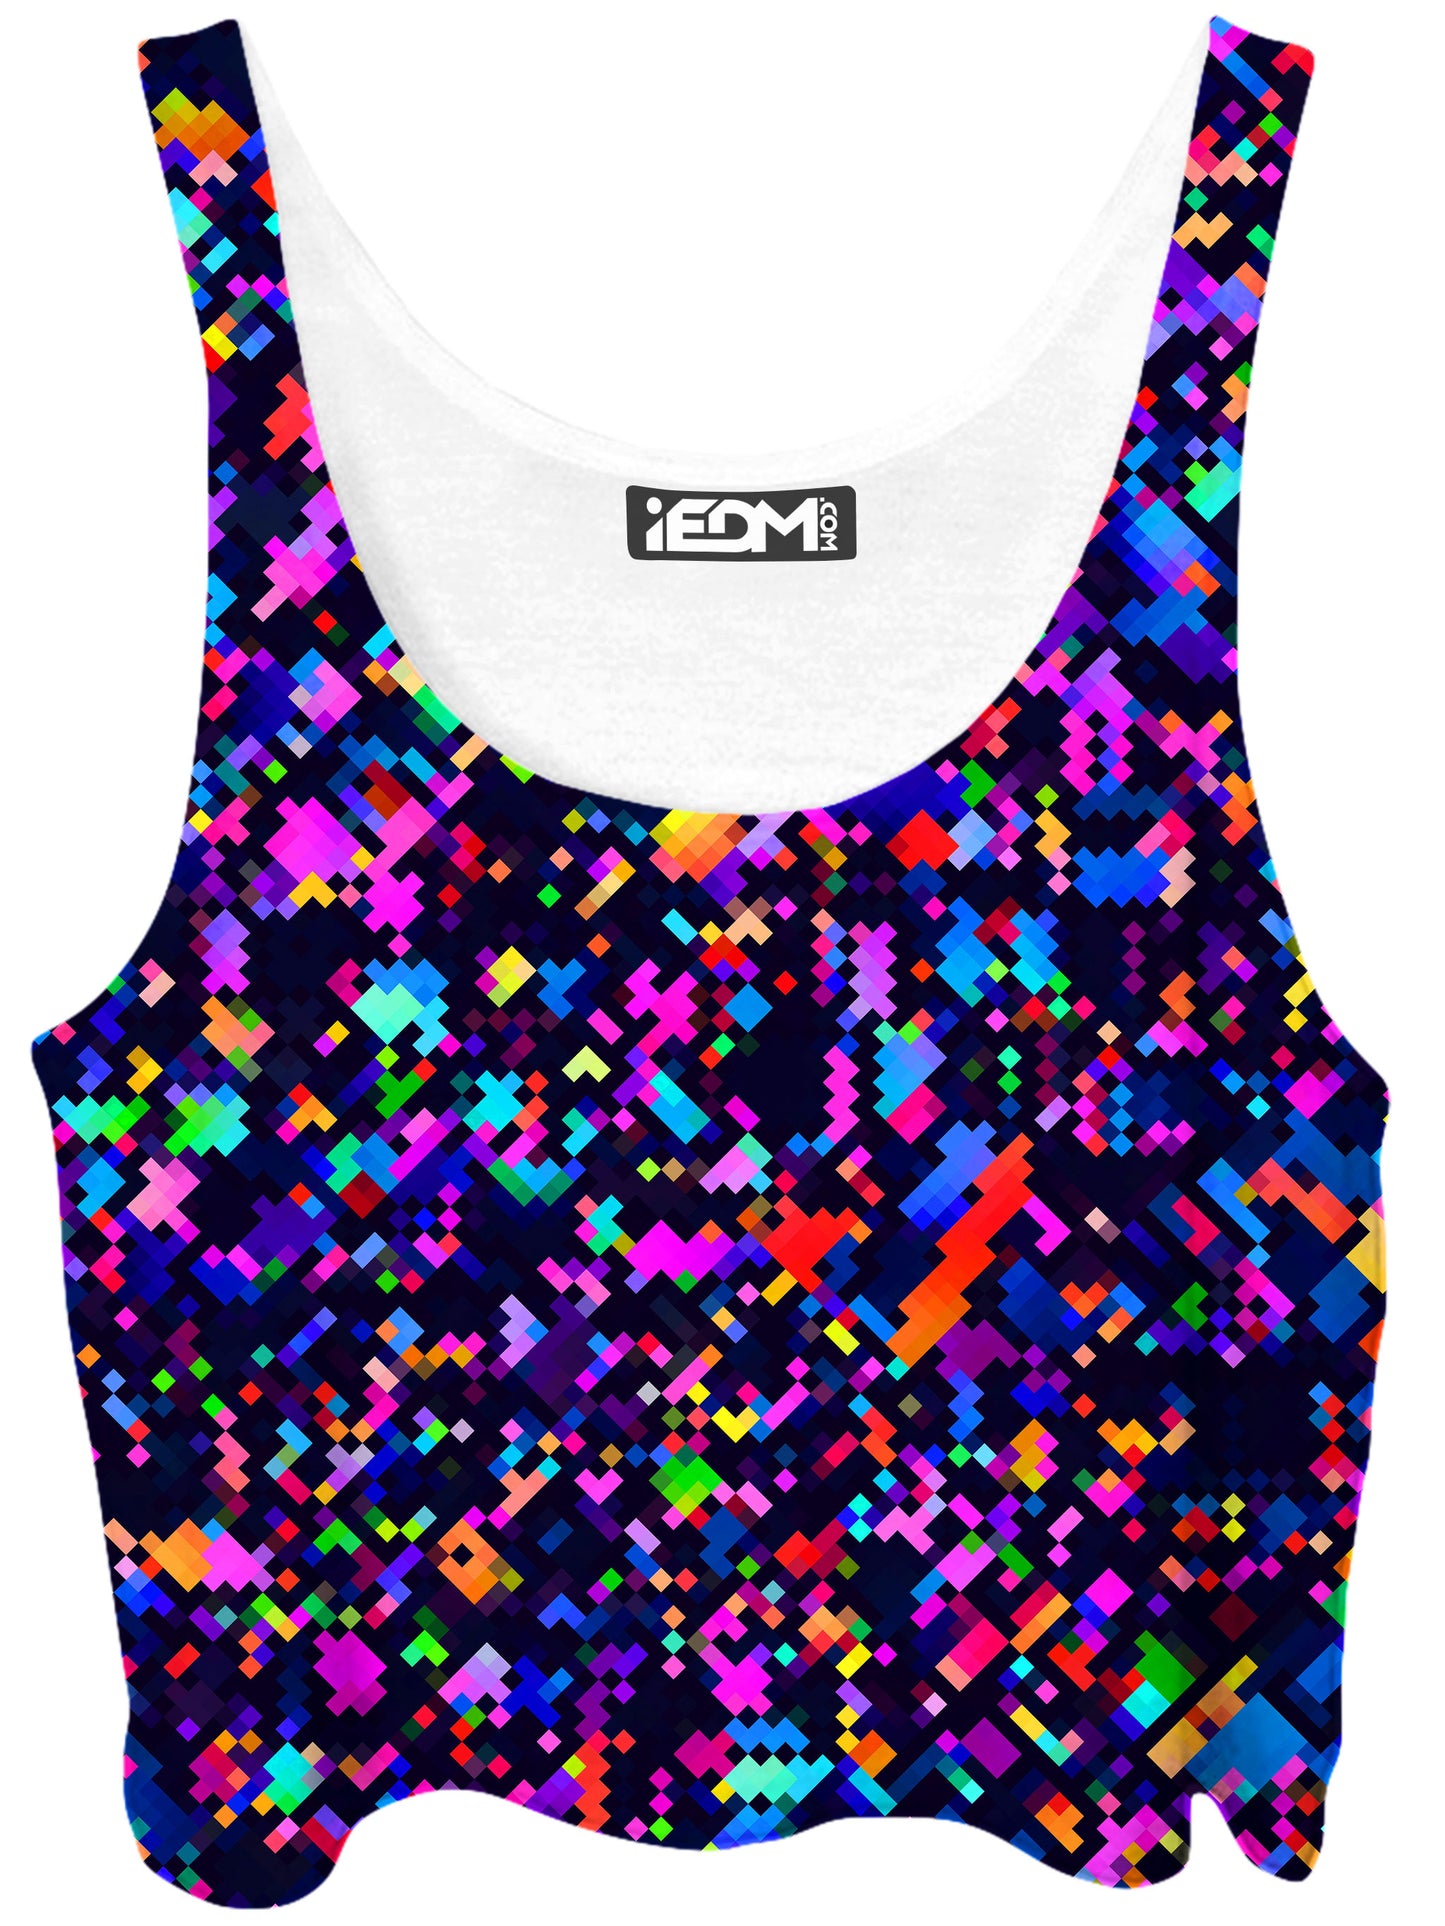 8-Bit Confetti Crop Top and Booty Shorts Combo, Art Design Works, | iEDM